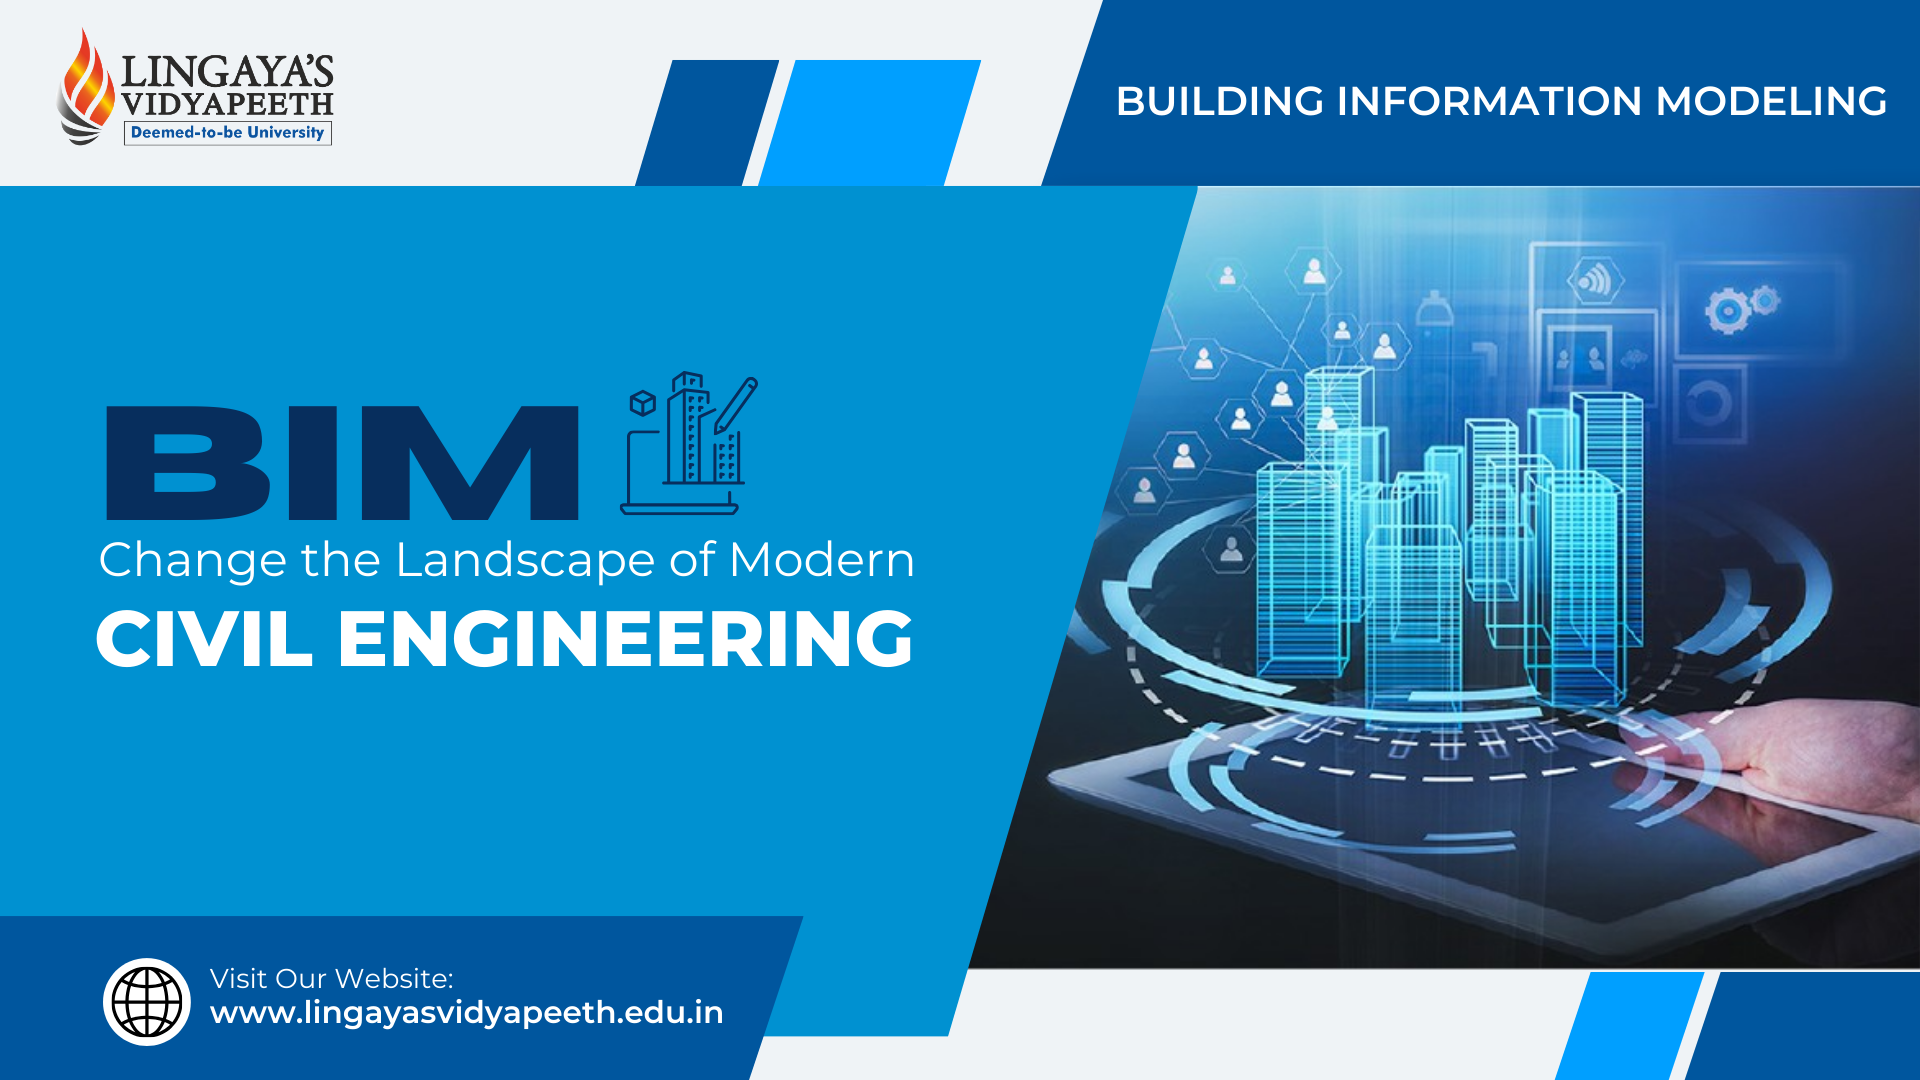 How Does BIM Change the Landscape of Civil Engineering?